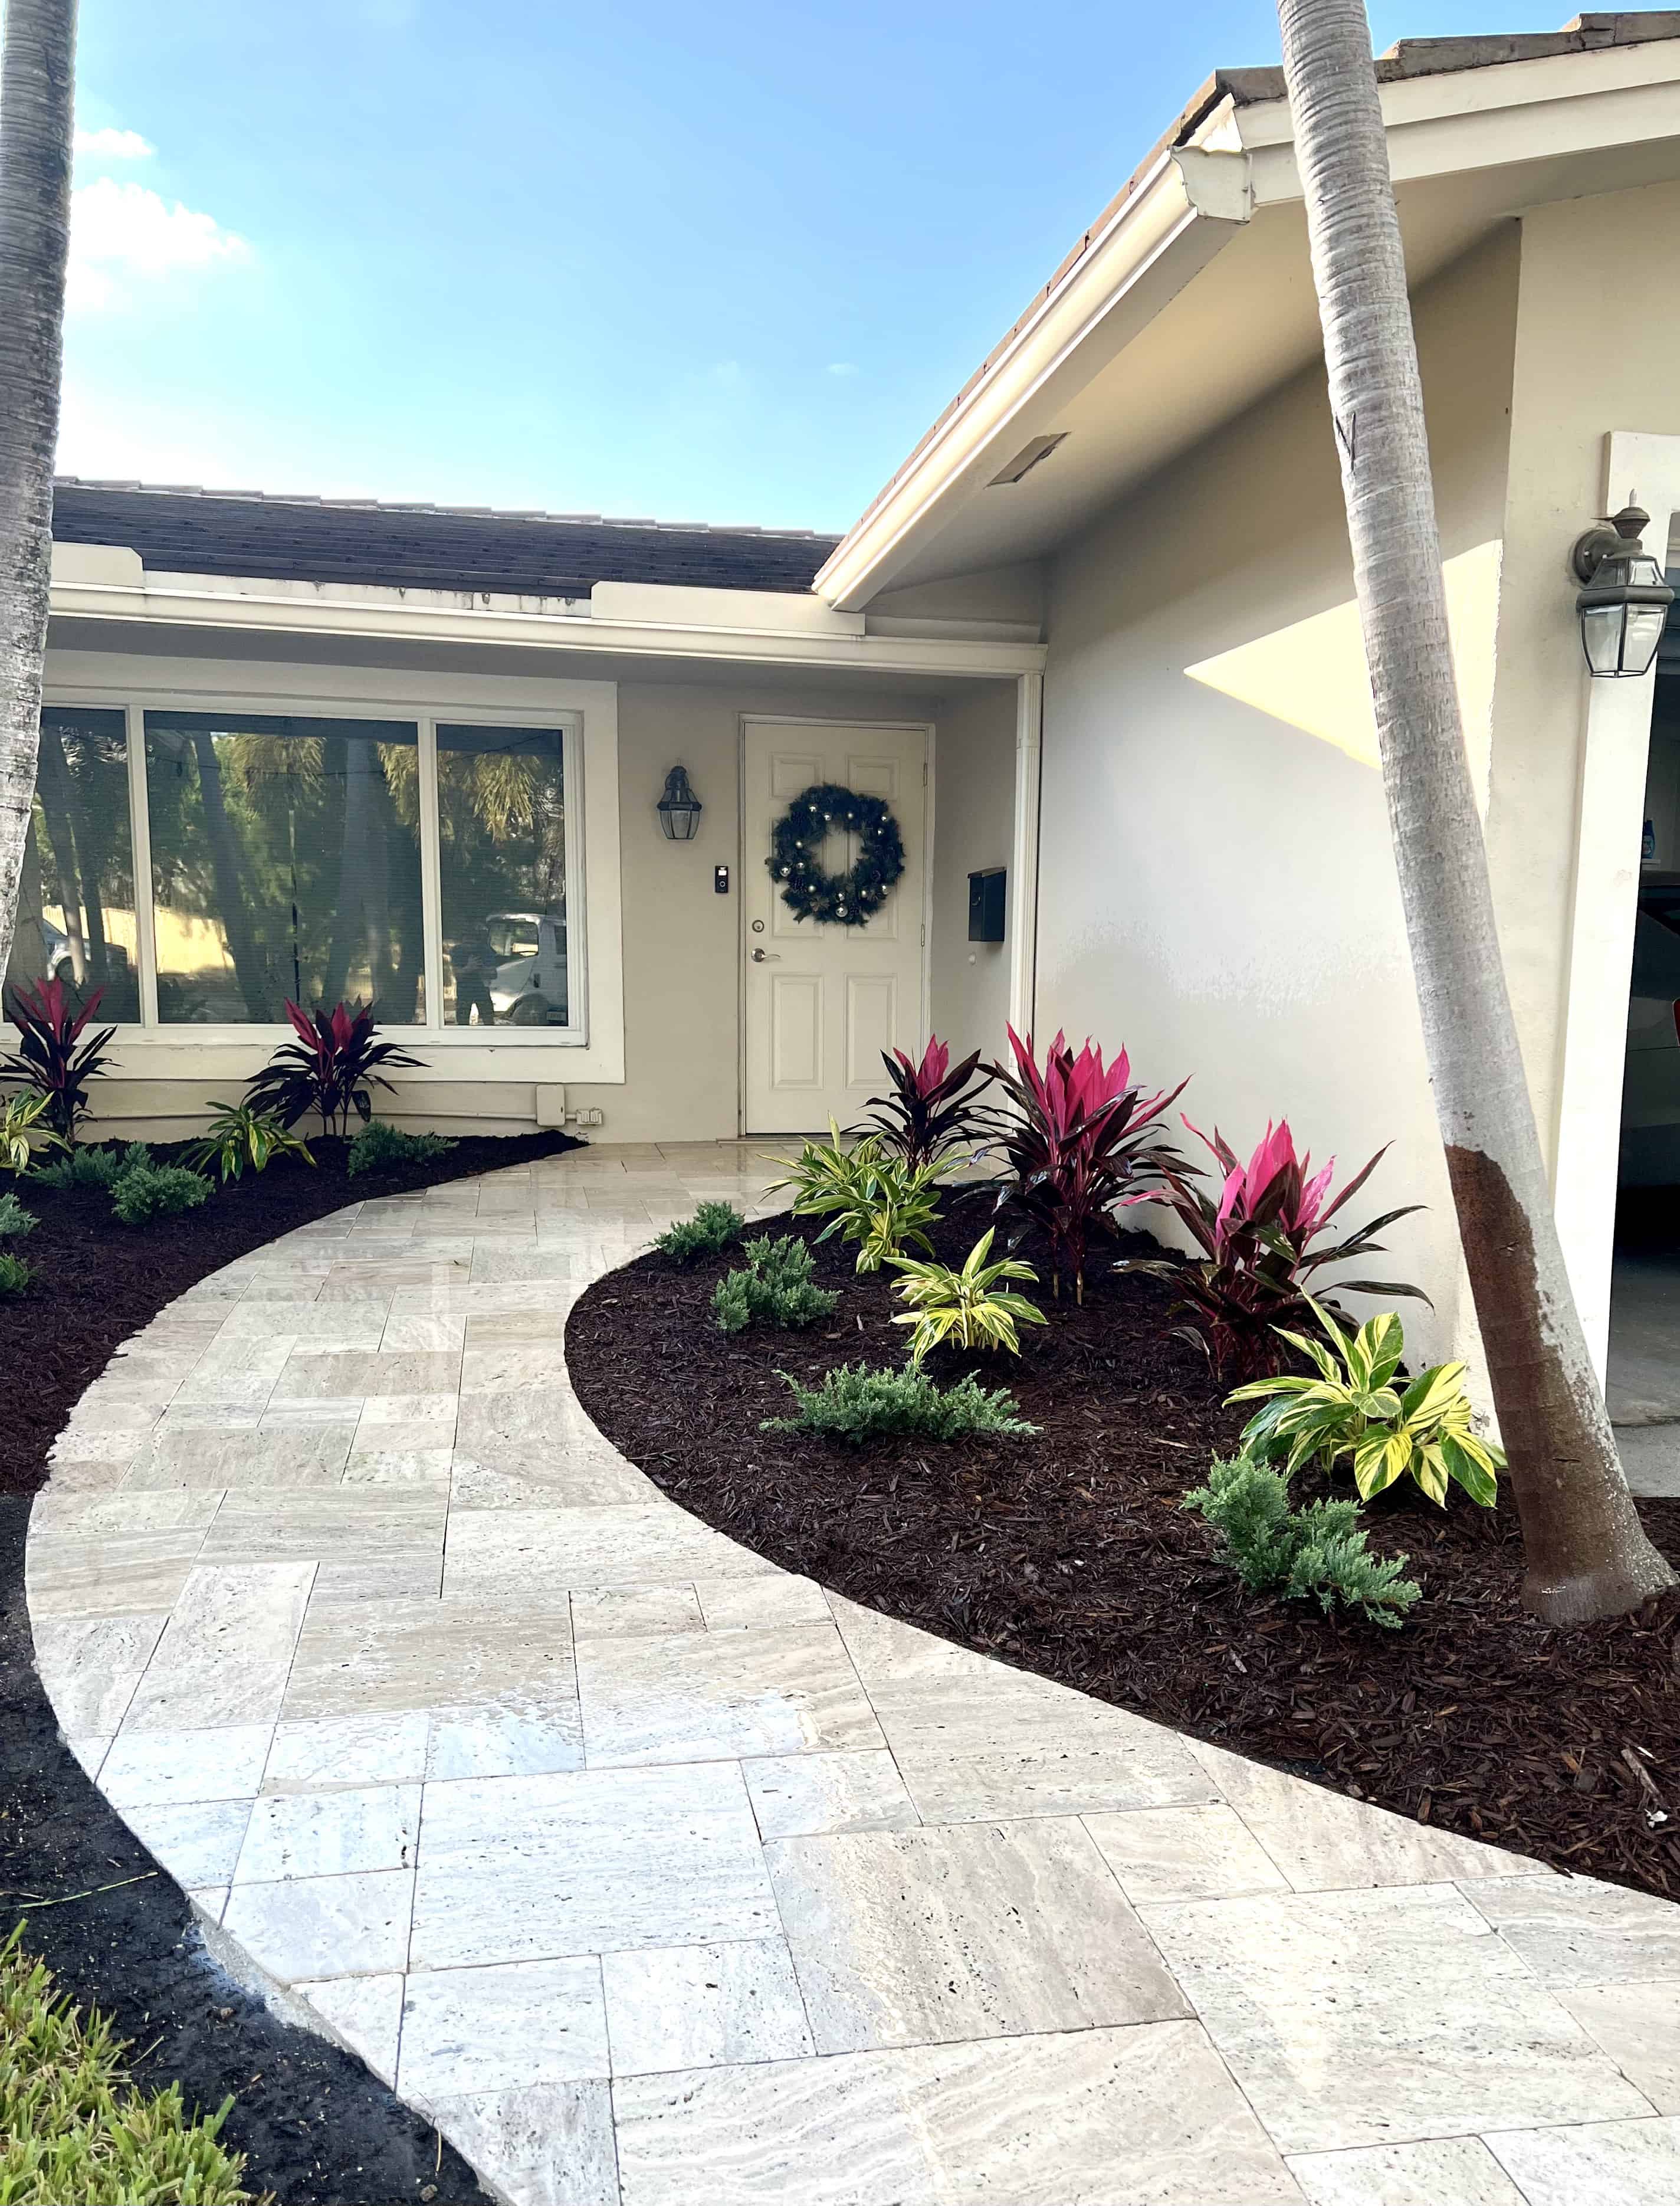 Expert landscaping can increase your property's value in the competitive Florida market. Read our blog for insights, and contact Pristine Landscapes to make it happen!